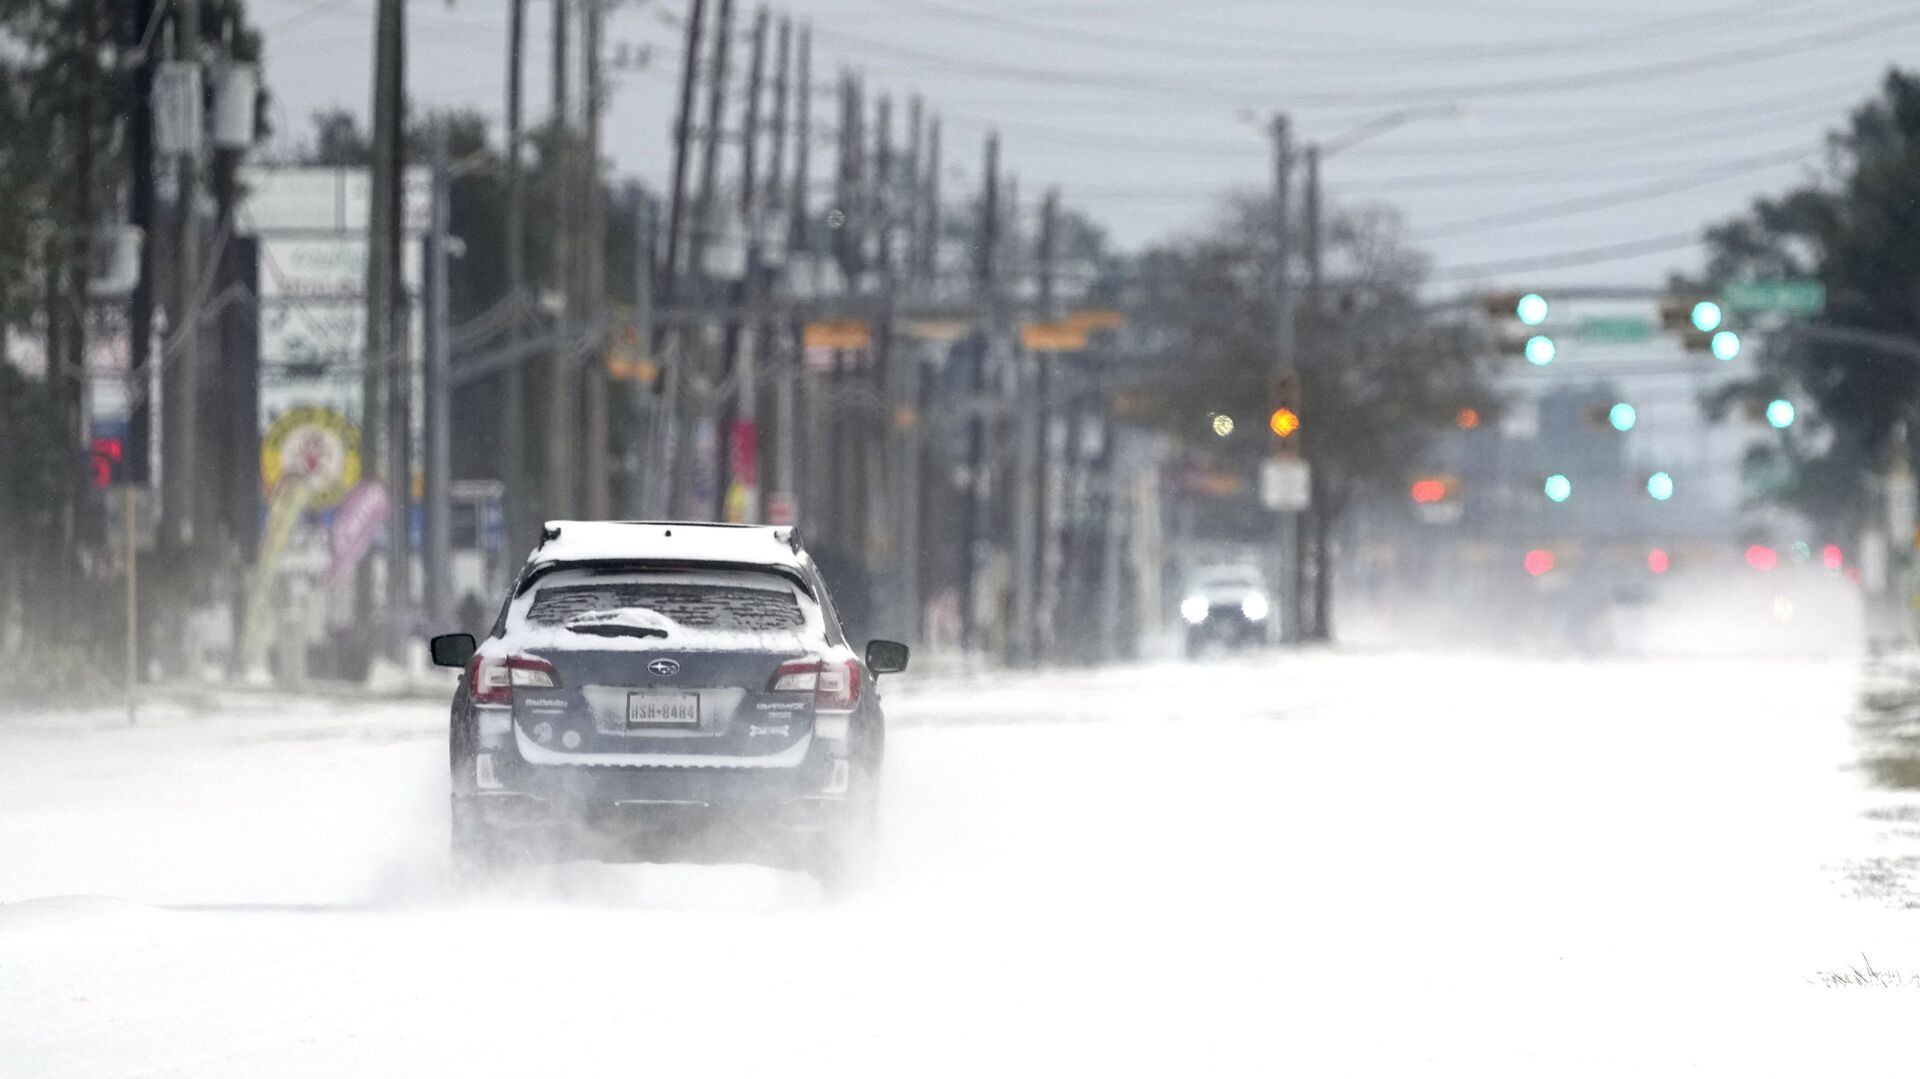 Vehicles drive on snow and sleet covered roads Monday, Feb. 15, 2021, in Spring, Texas. - Sputnik International, 1920, 27.02.2021